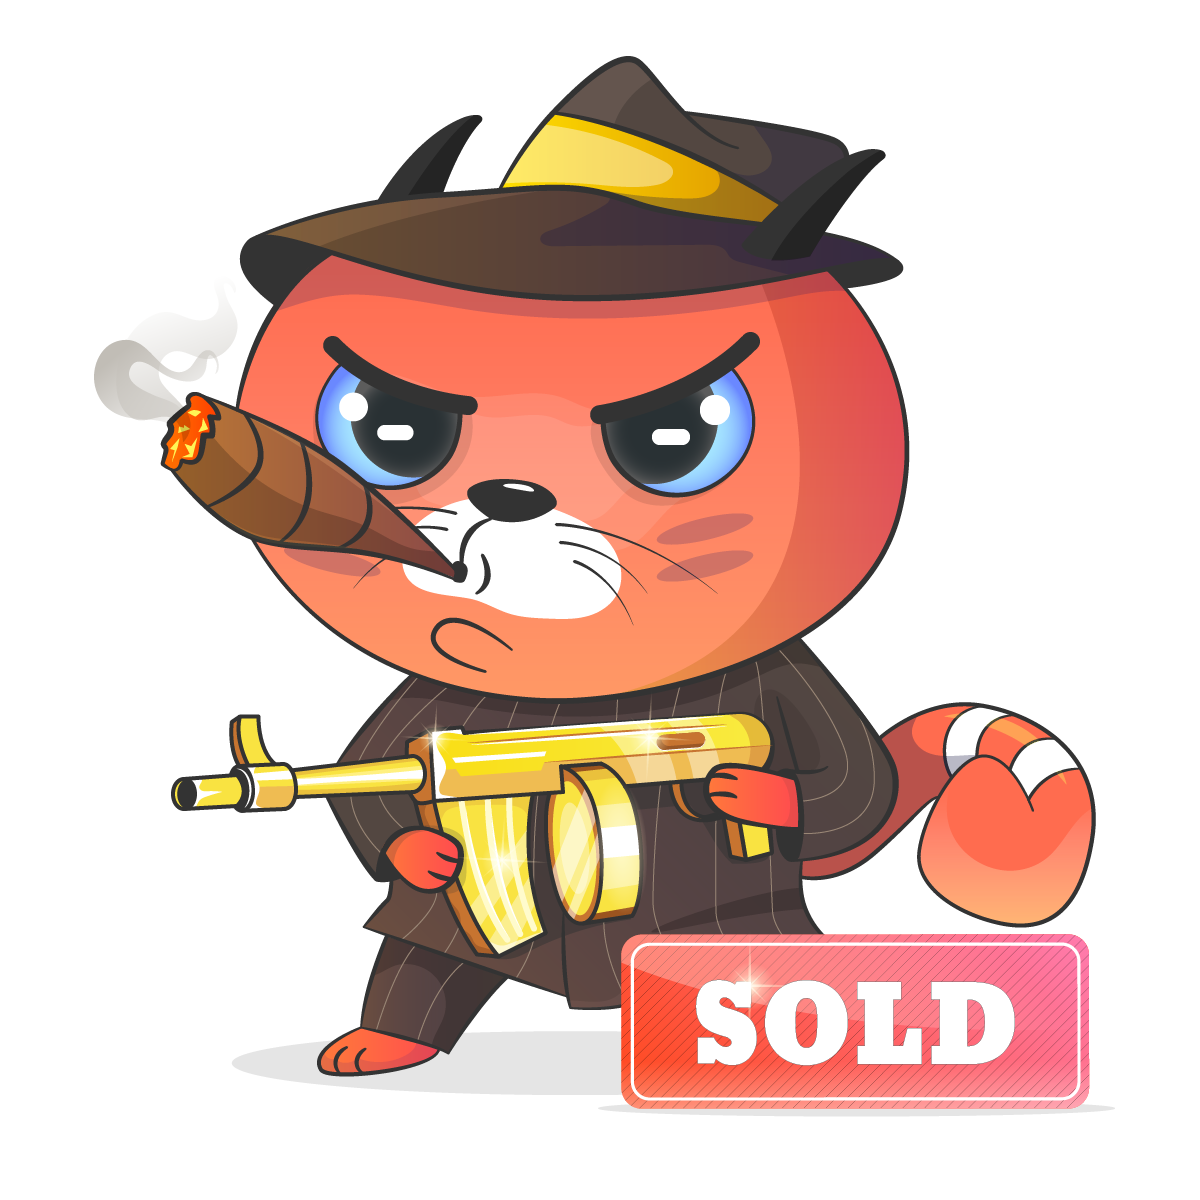 AlCapone_sold-01.png